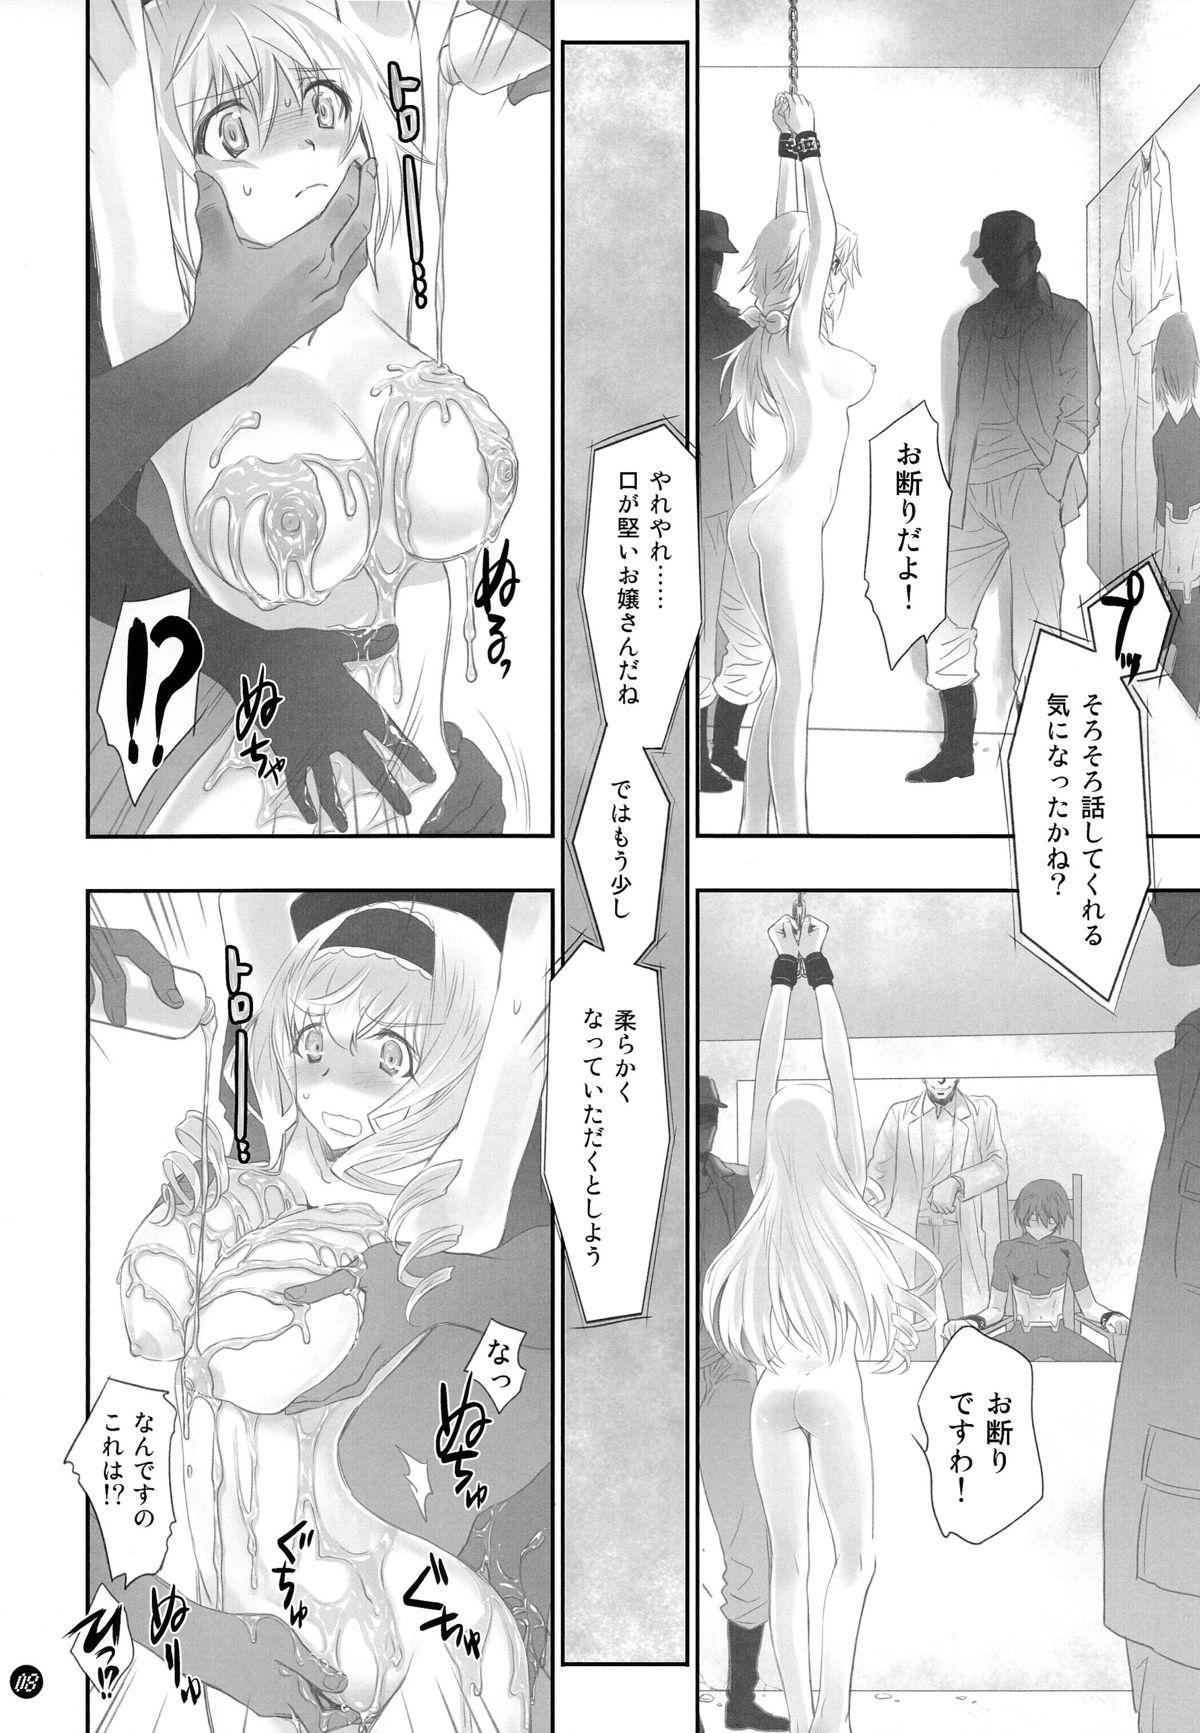 Young Petite Porn I Do My Best For You - Infinite stratos Nudity - Page 8